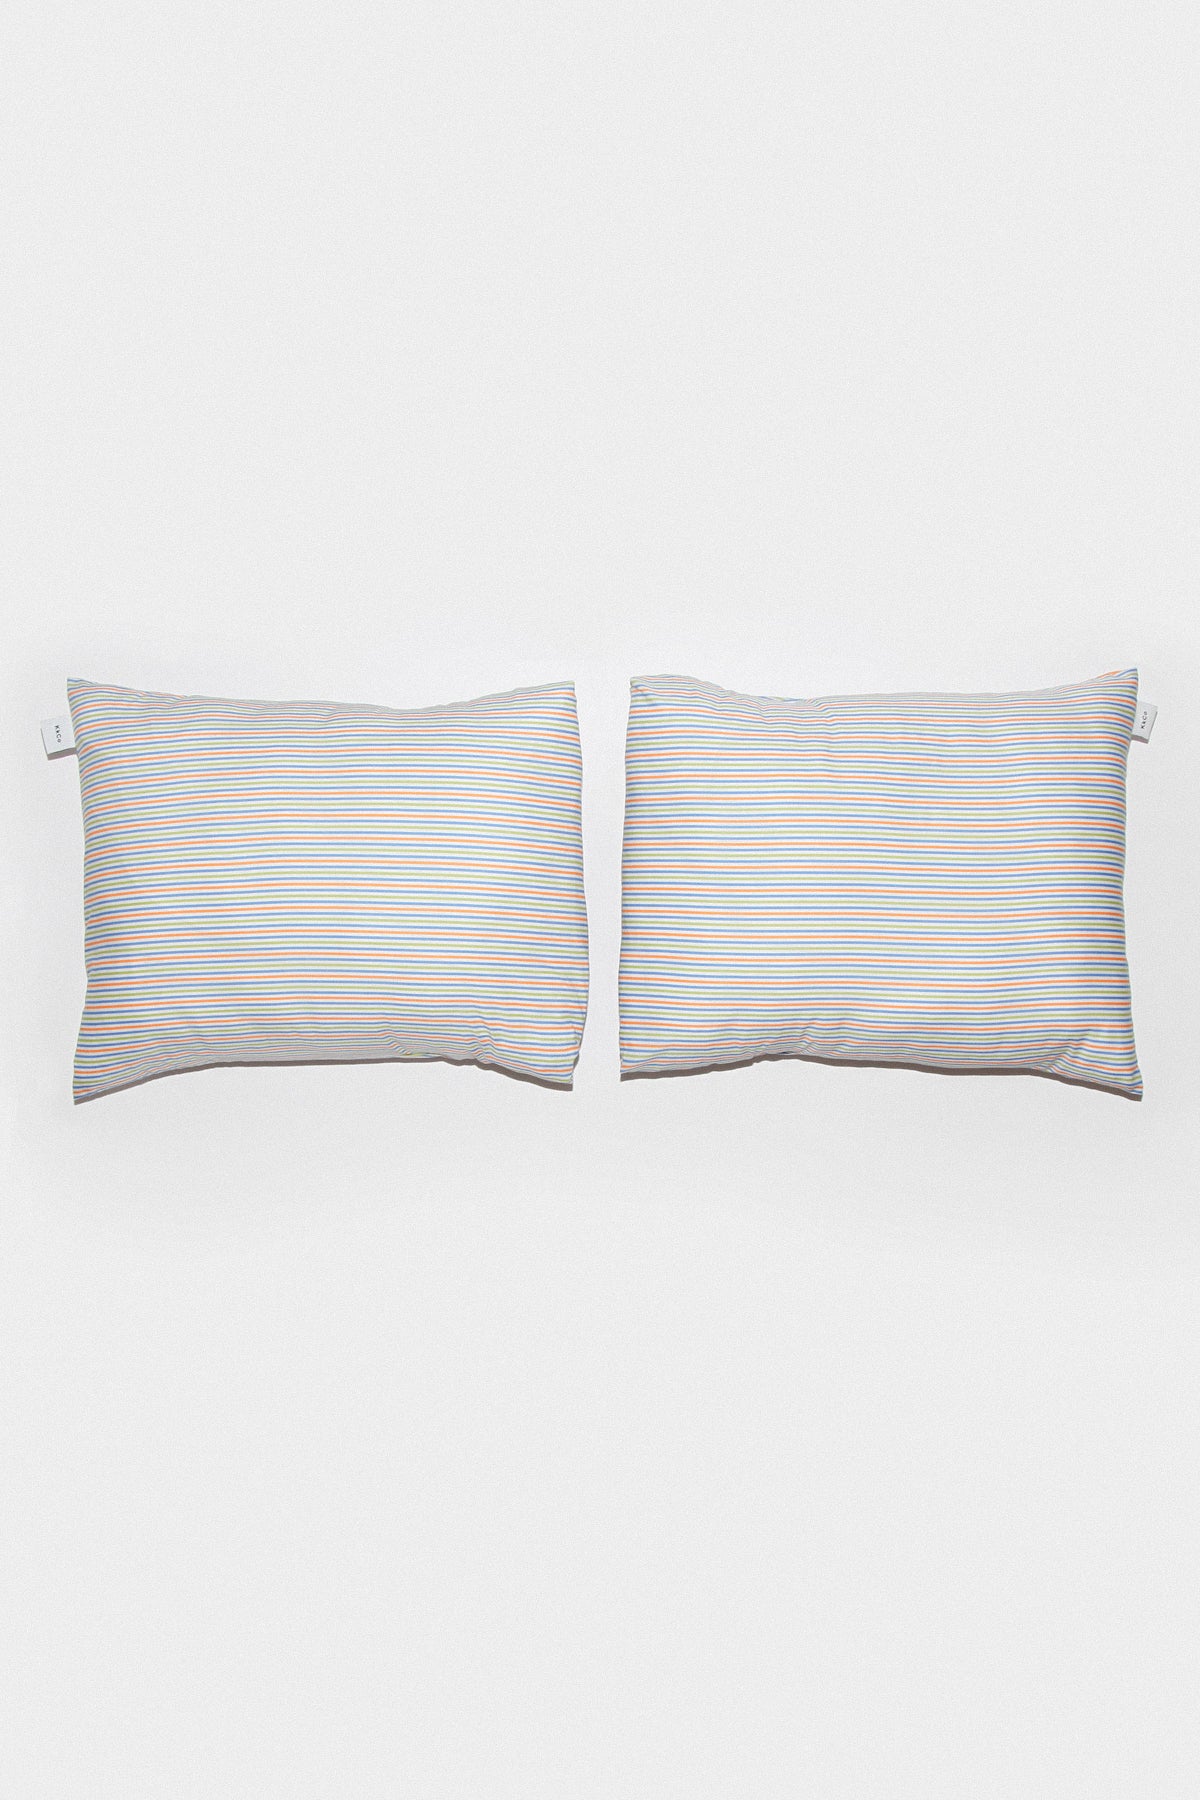 Pillow Sham Set in Striped Sunny